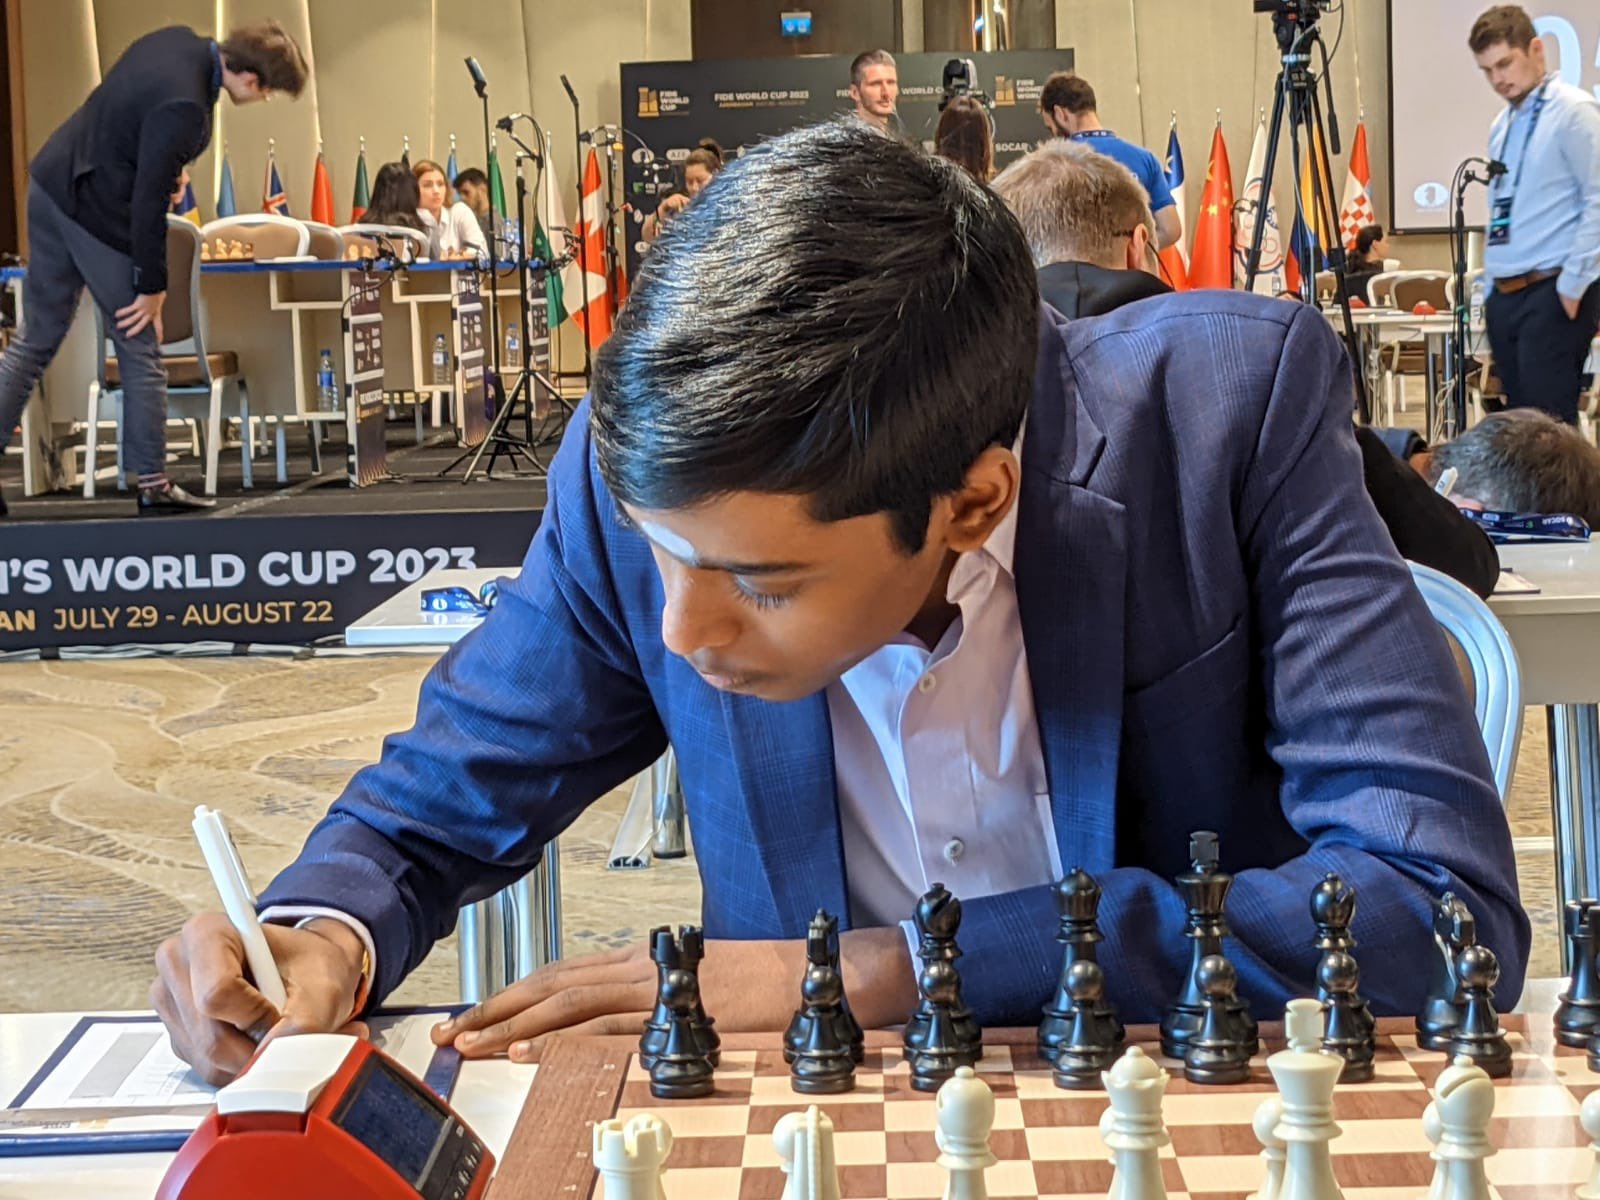 Gibraltar International Chess Festival on X: Great to see Indian prodigy  Gukesh D (2542 🇮🇳) back at the Rock. @DGukesh is the second youngest  Grandmaster in history! Best wishes to Guki for #